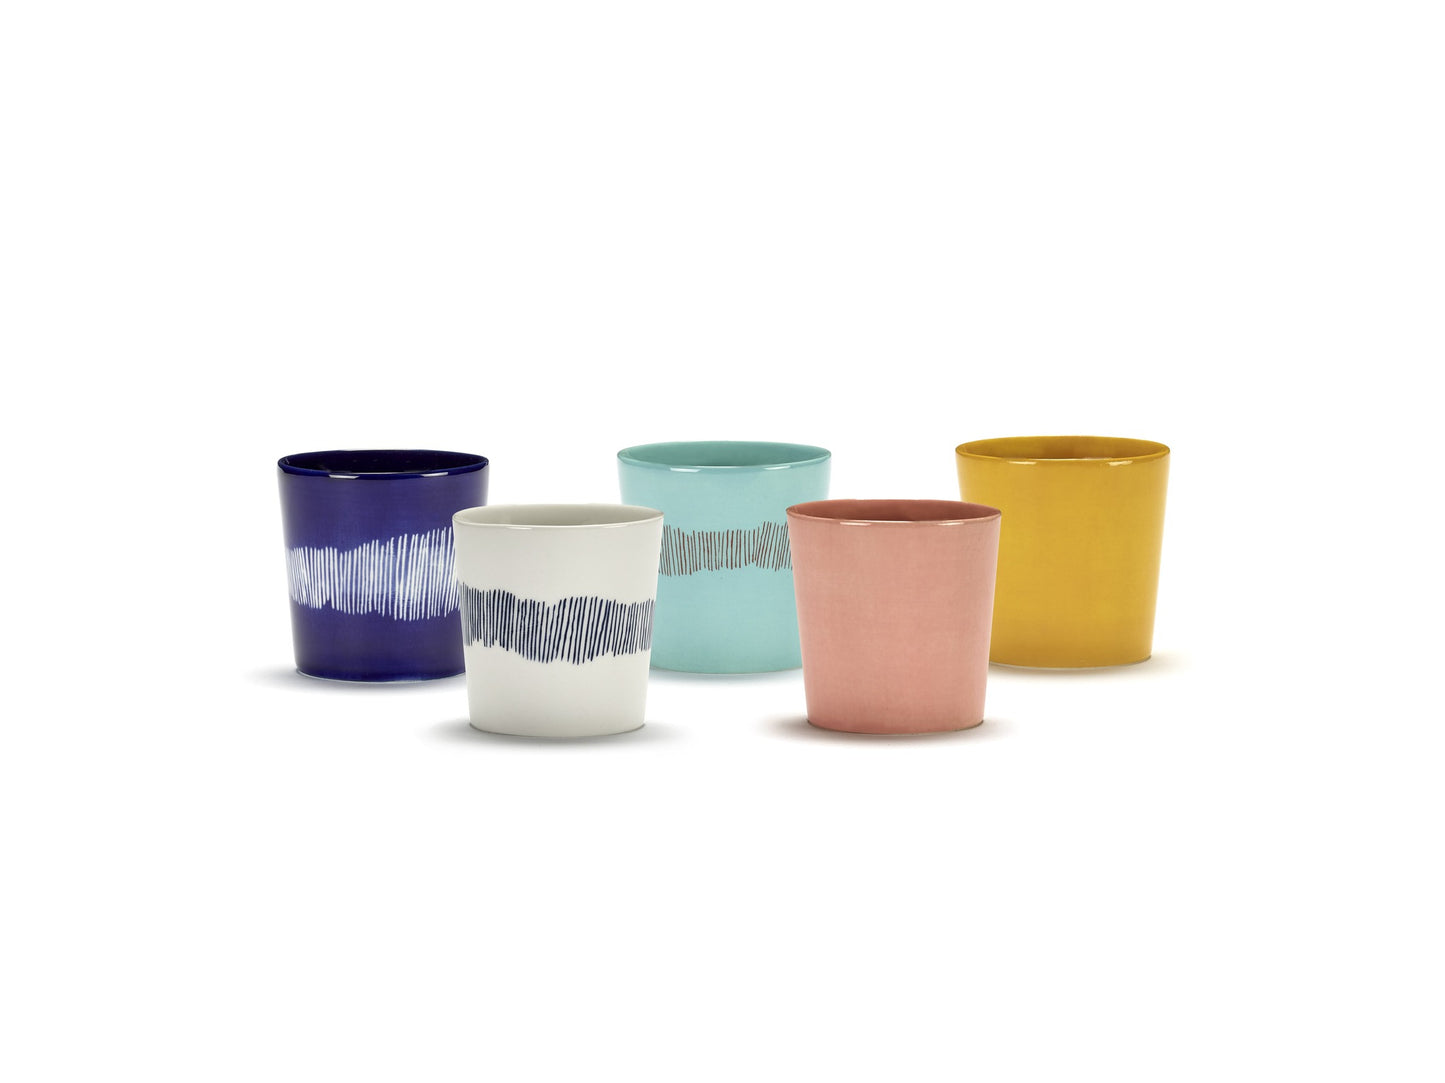 Ottolenghi Coffee Cup - Pink